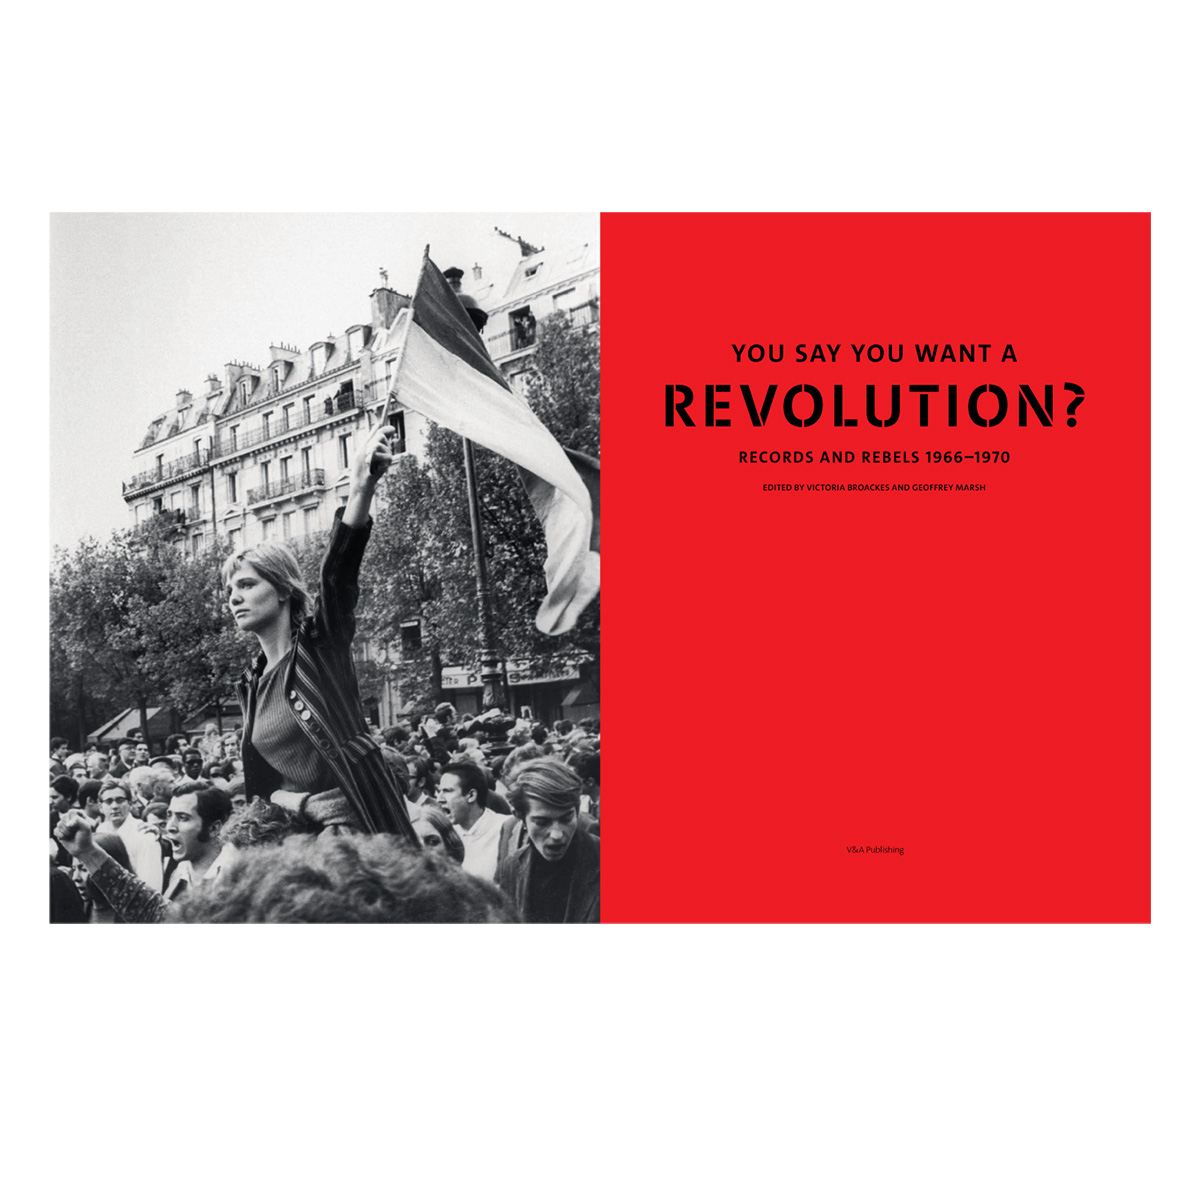 You say you want a revolution? Records and rebels 1966-1970